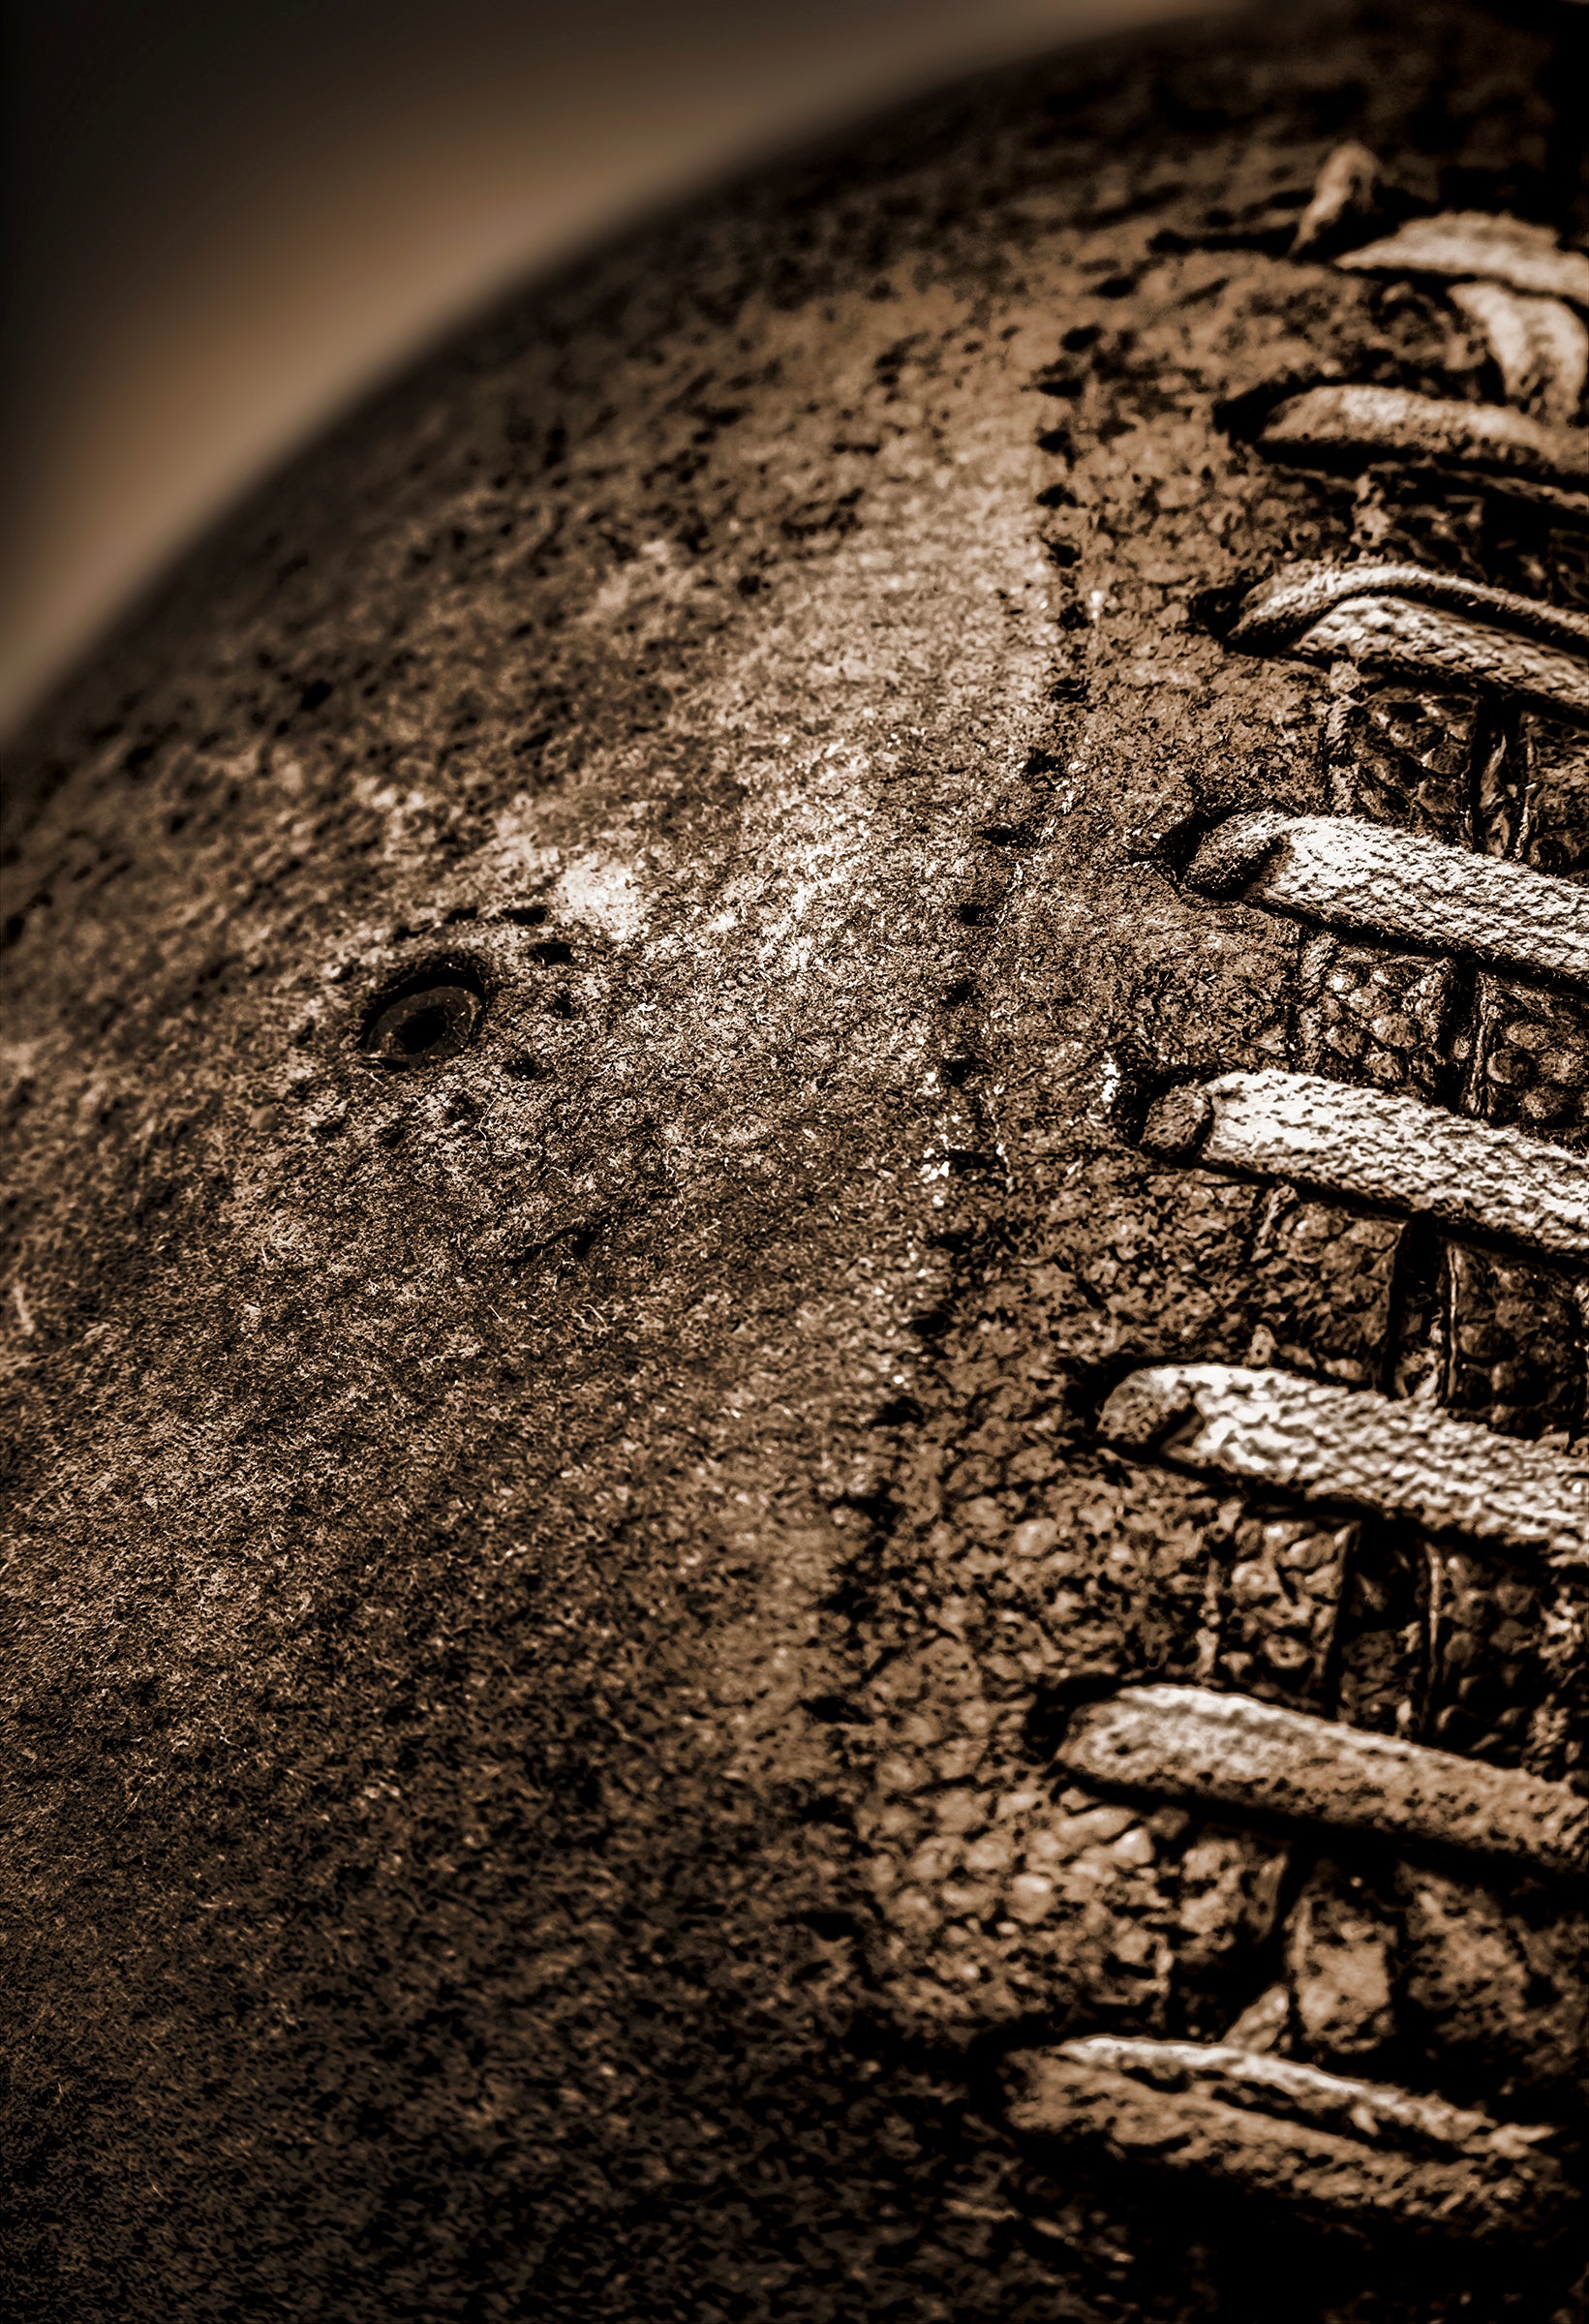 Sepia tone old football close up with a grungy look shot in studio